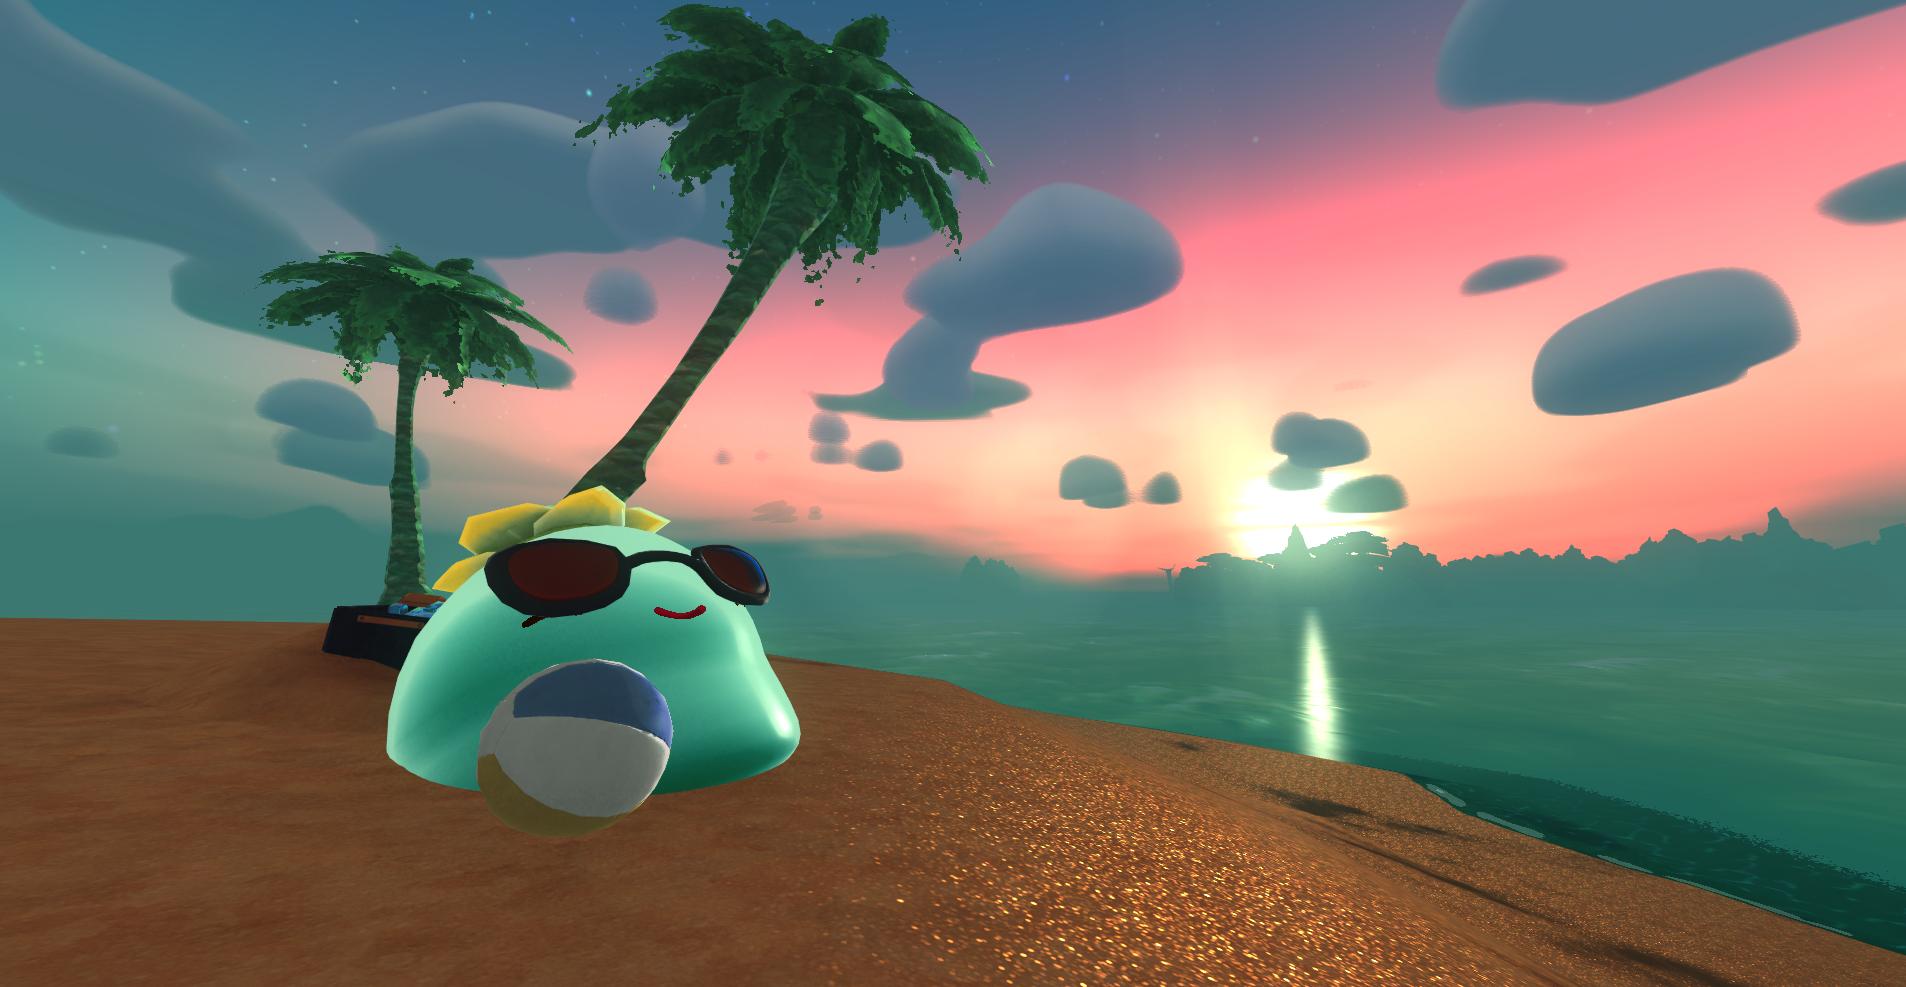 Two years ago today we launched Slime Rancher 1.0 and it's been quite a journey since. #slimerancher Here's an abbreviated look back at some of the biggest things